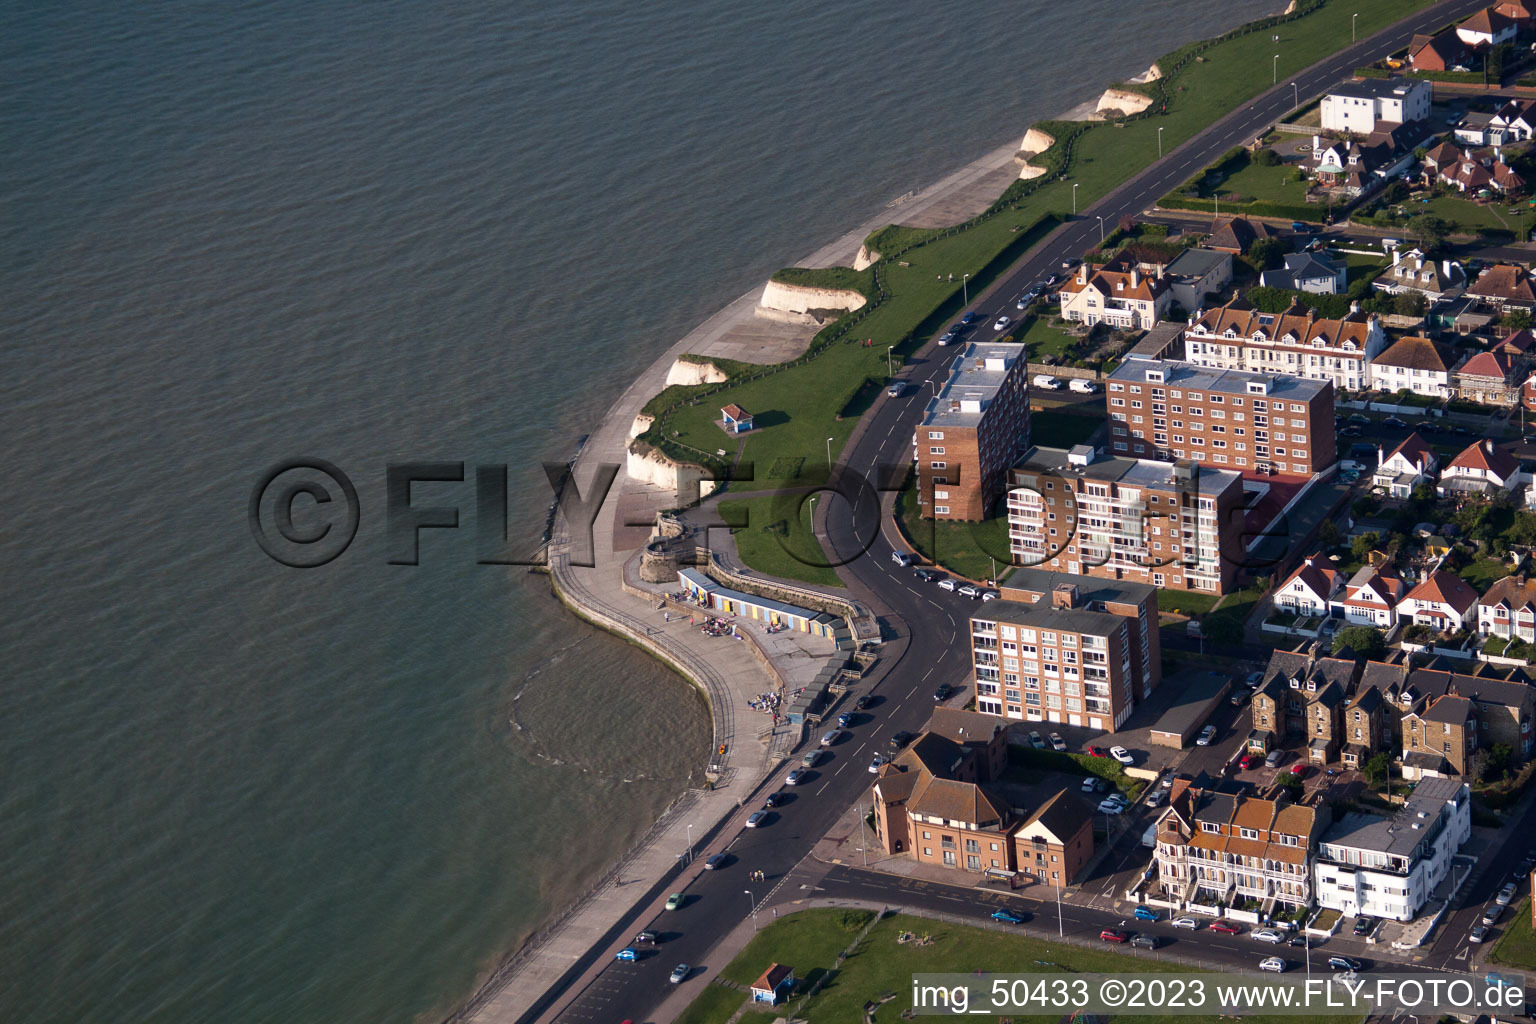 Birchington in the state England, Great Britain seen from above